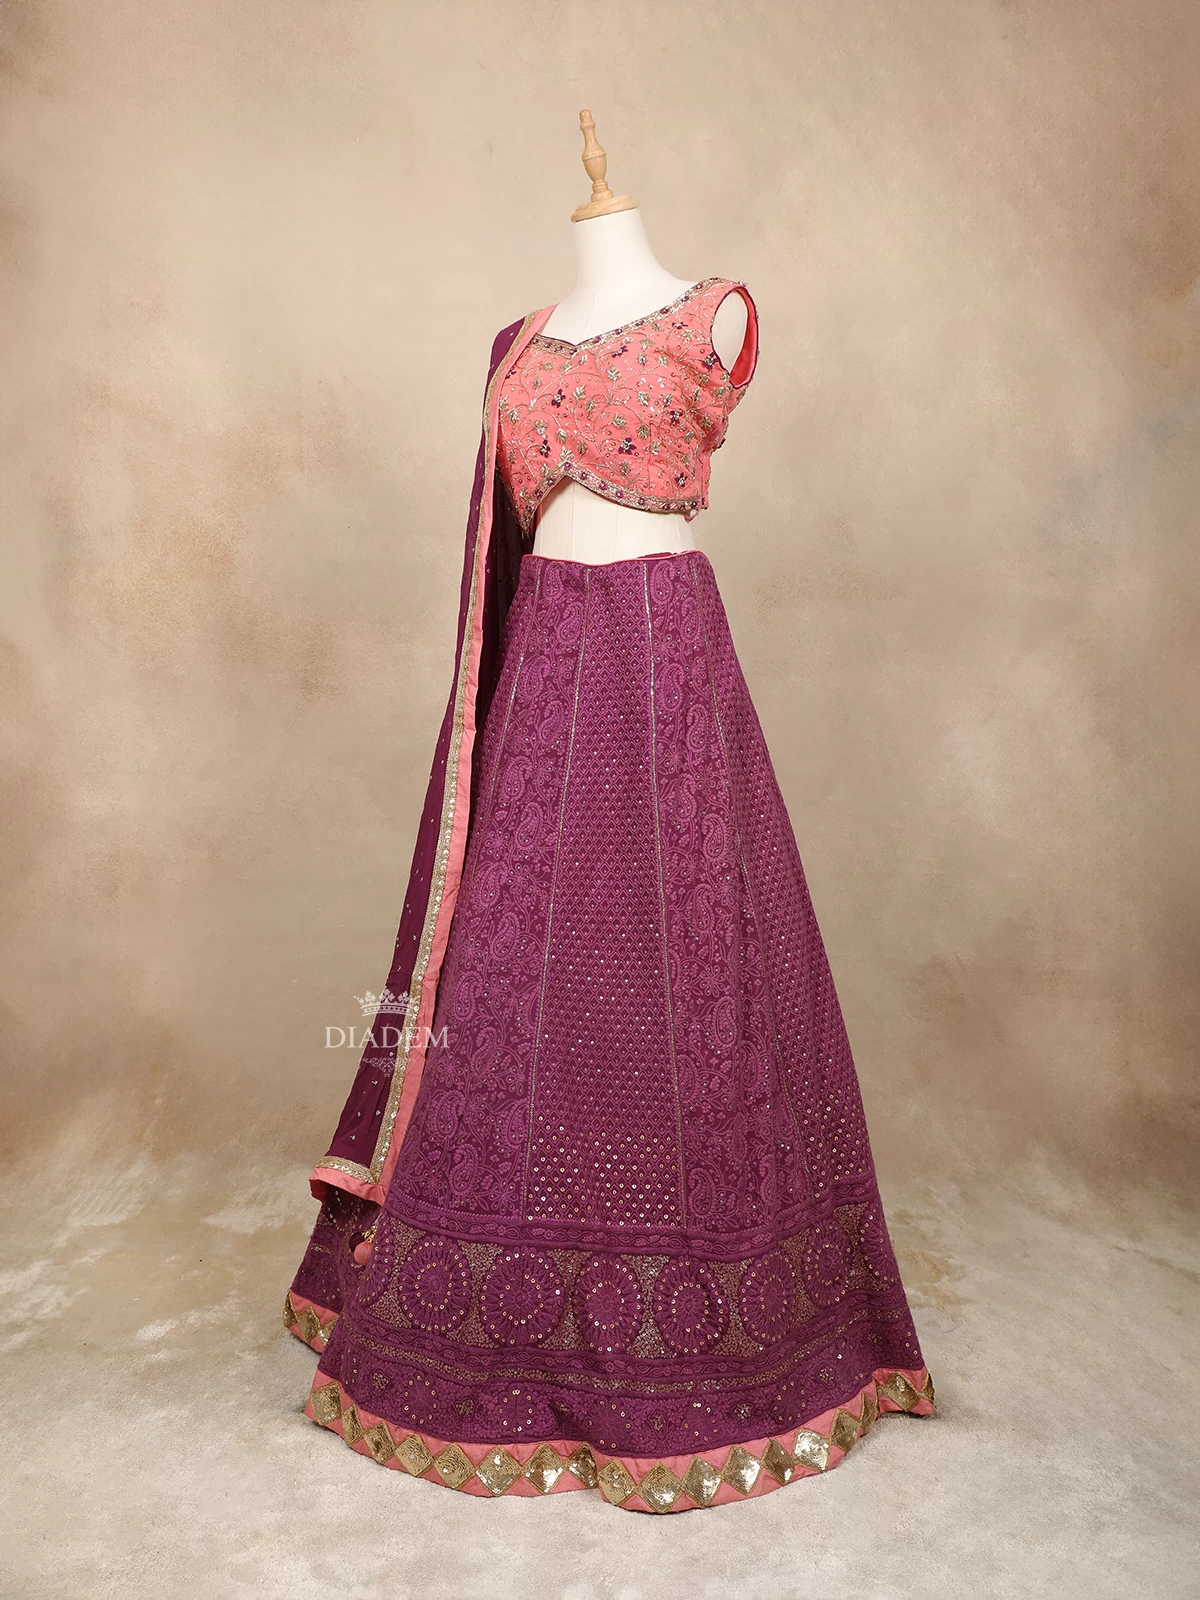 Purple Silk Lehenga Adorned With Floral Threadwork Embroidery And Beads, Paired With Dupatta